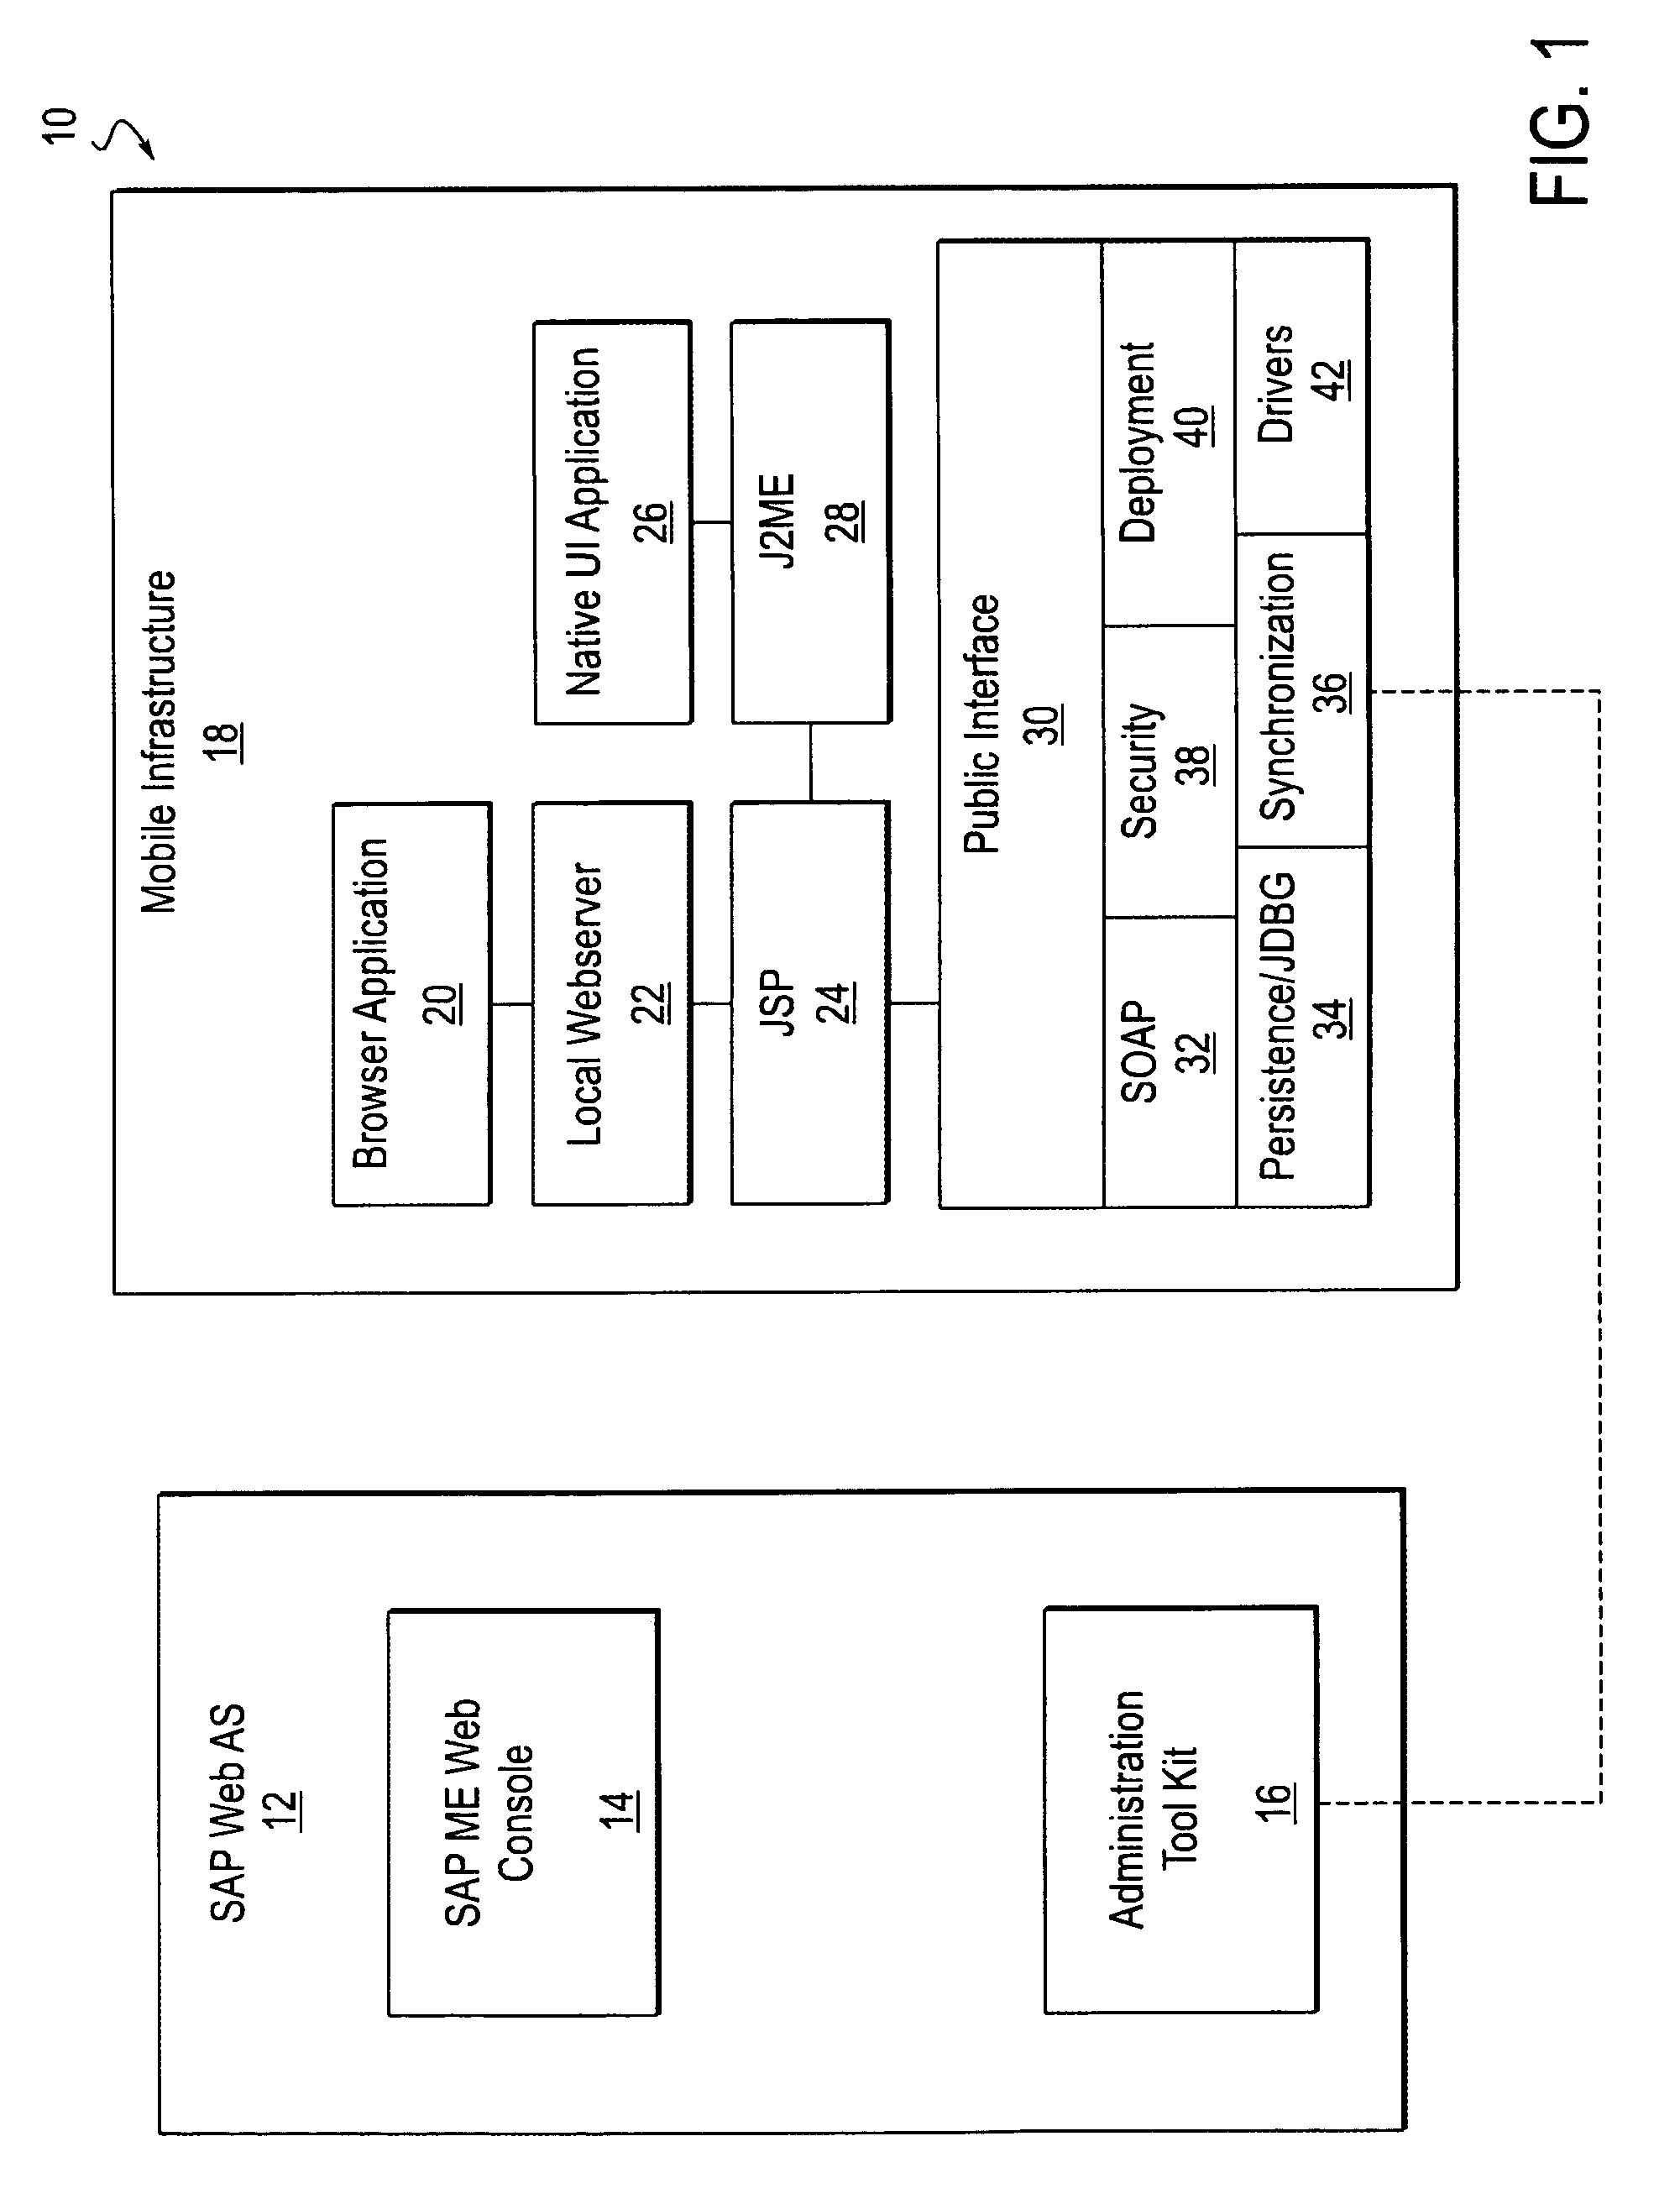 Method and apparatus for storing data on the application layer in mobile devices